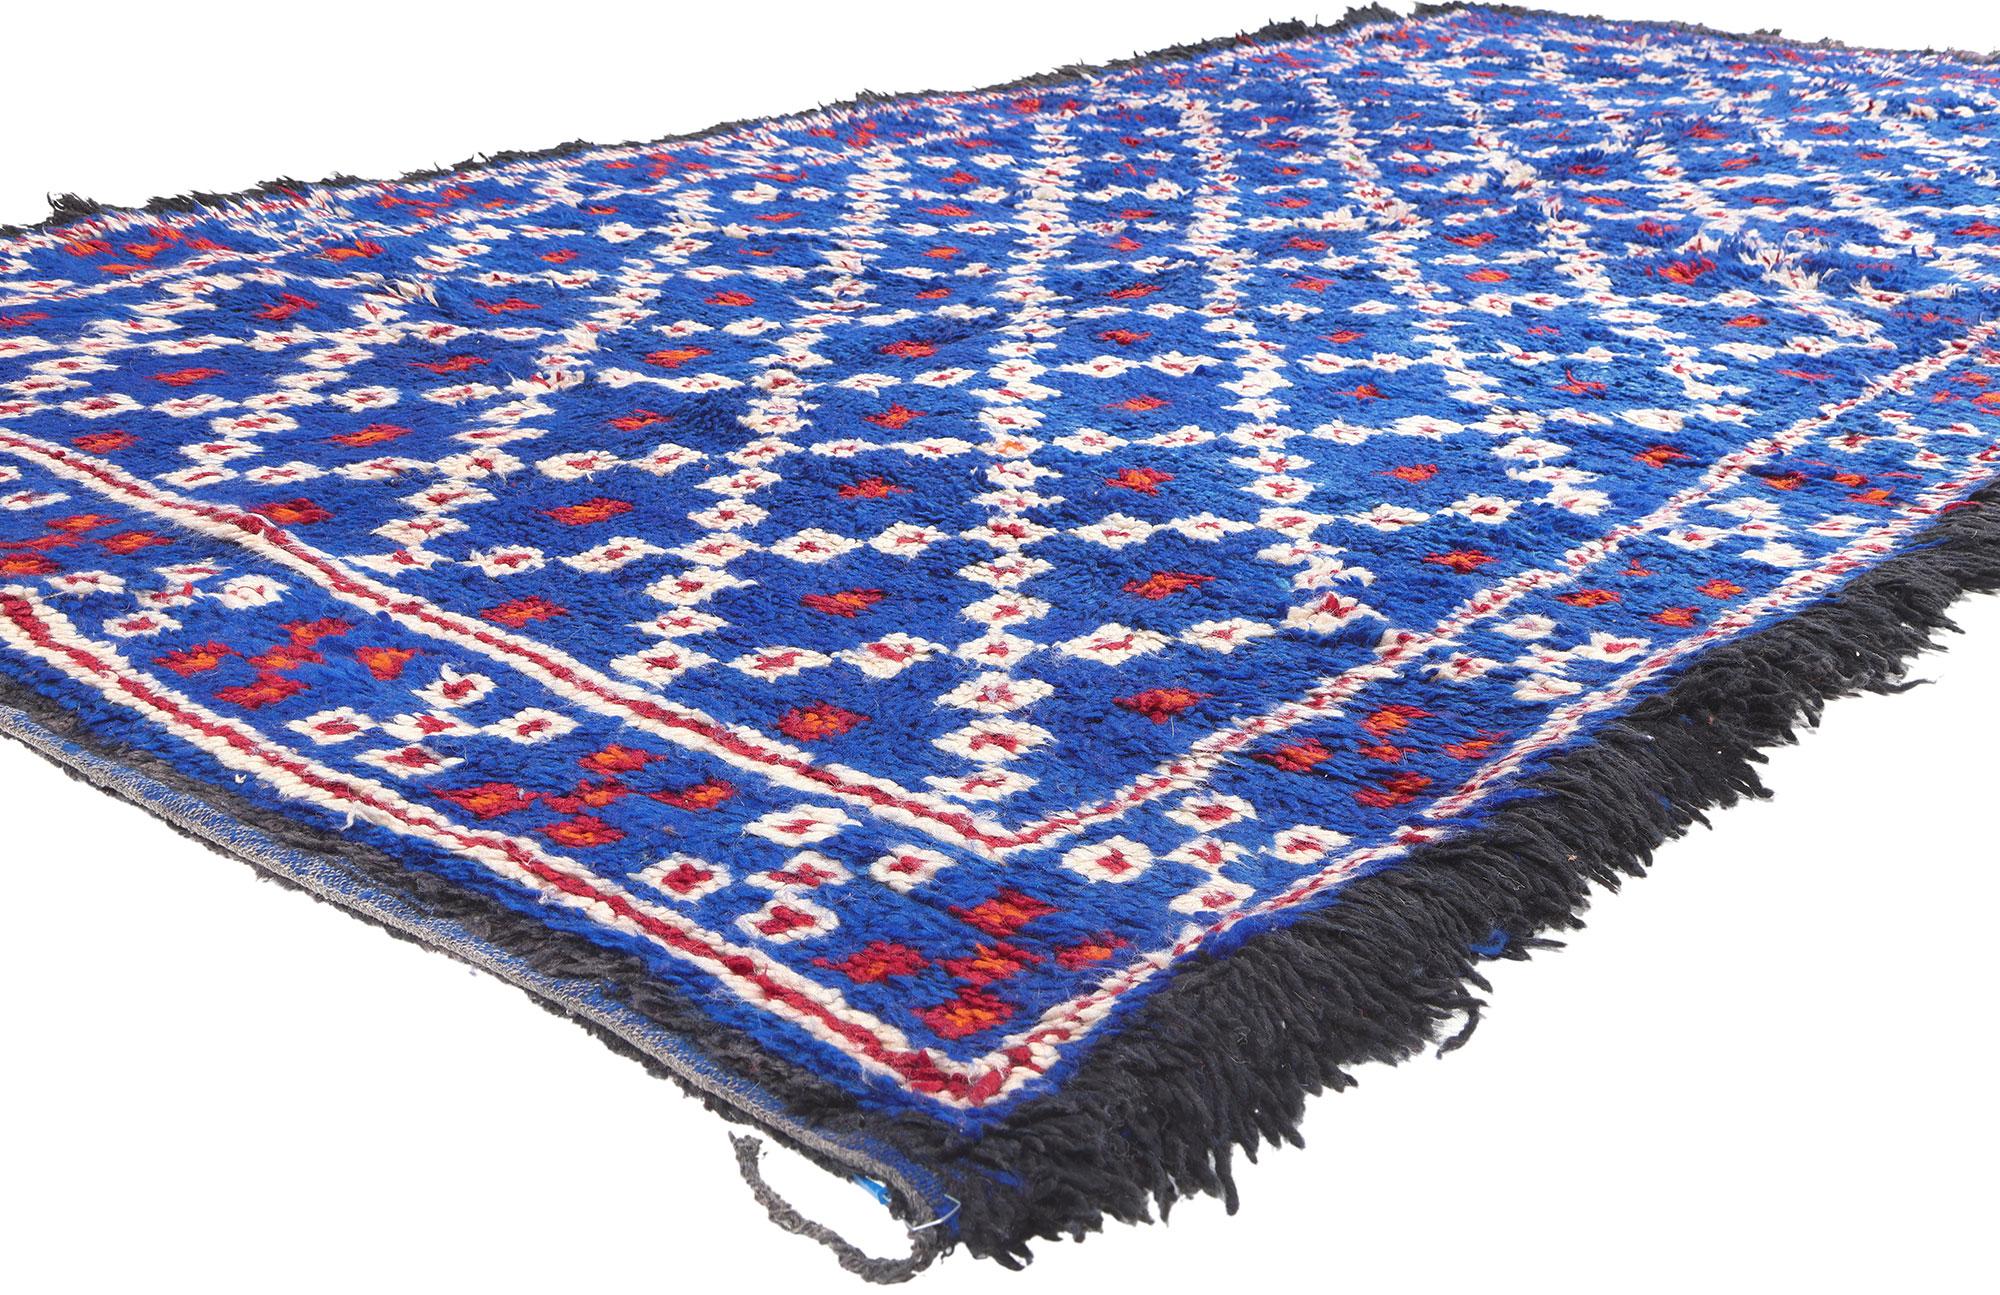 20968, vintage Indigo Beni M'Guild rug, Berber blue Moroccan carpet. Featuring a luminous sapphire glow and luxury underfoot, this hand knotted wool vintage indigo blue Moroccan Beni M'Guild rug astounds with its beauty. It features a bold geometric